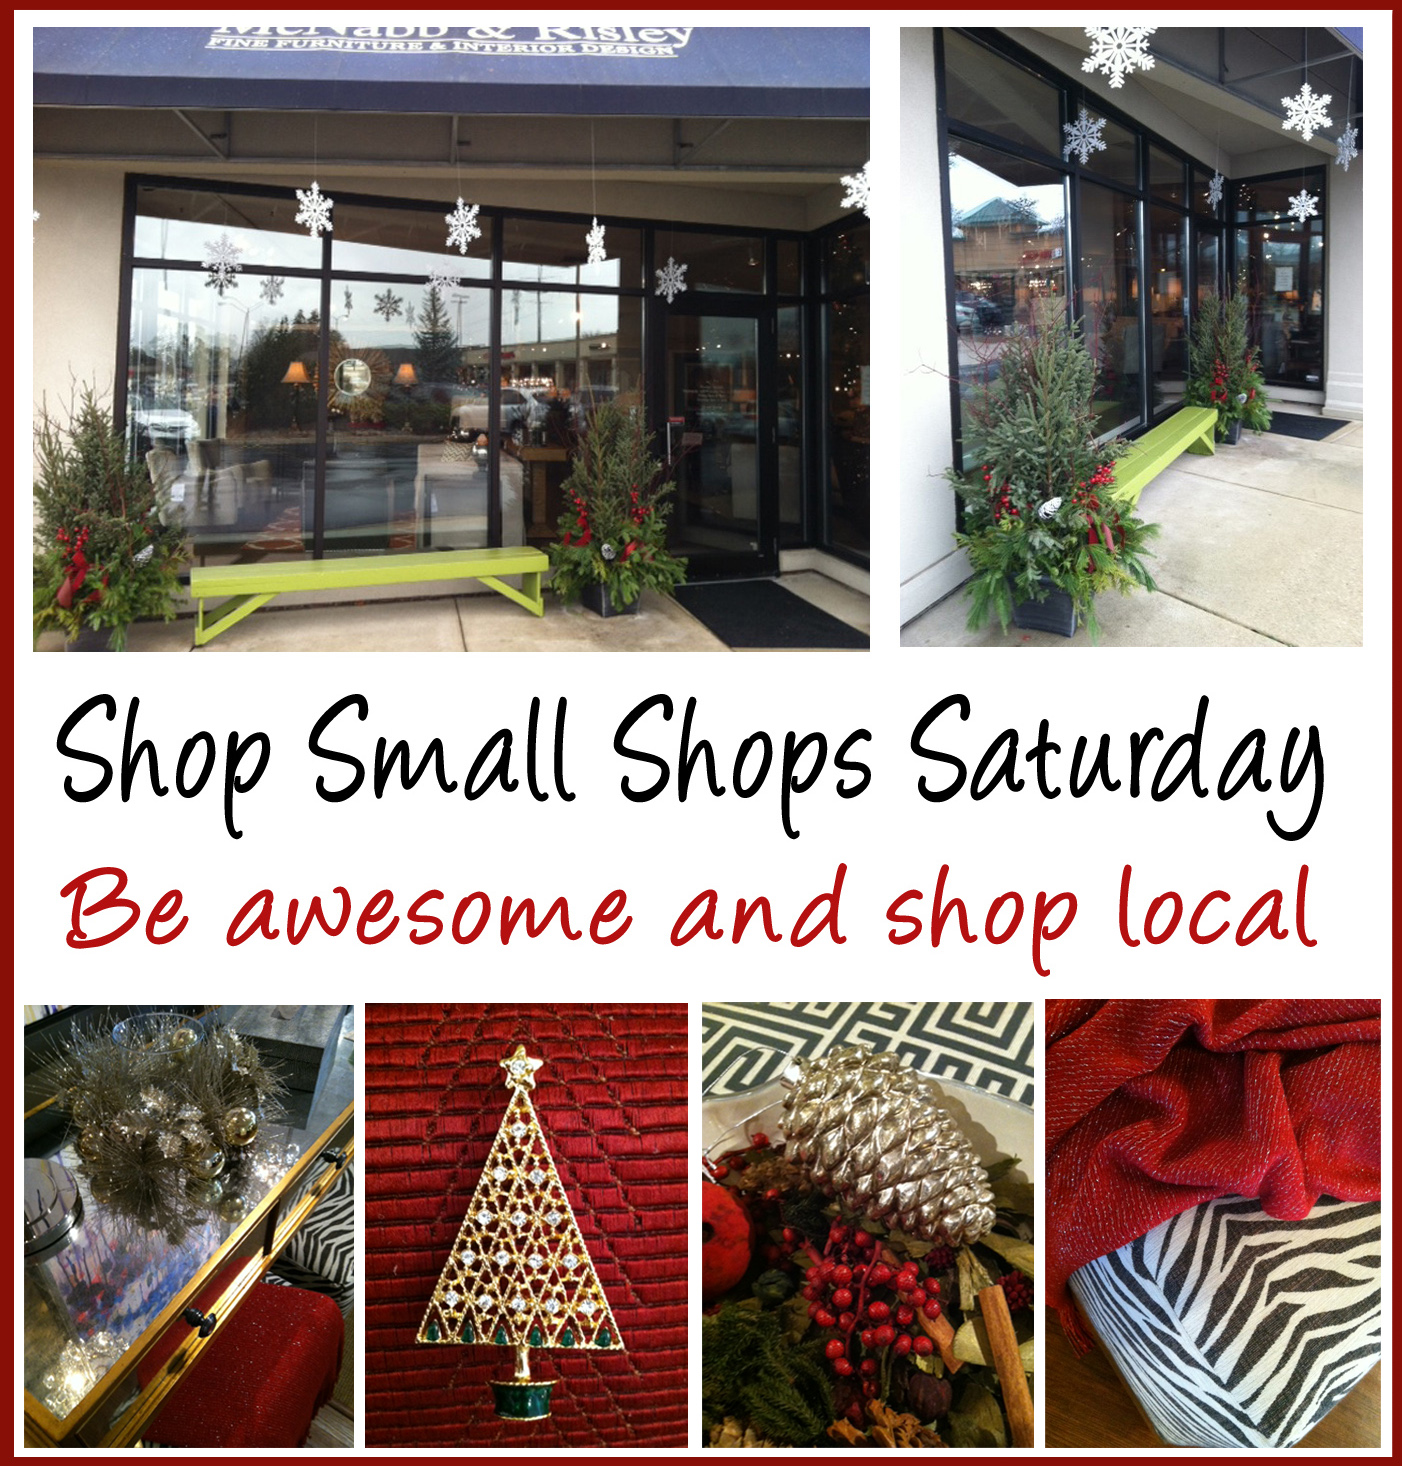 Change your world for the better and shop local on Small Shop Saturday! - McNabb & Risley